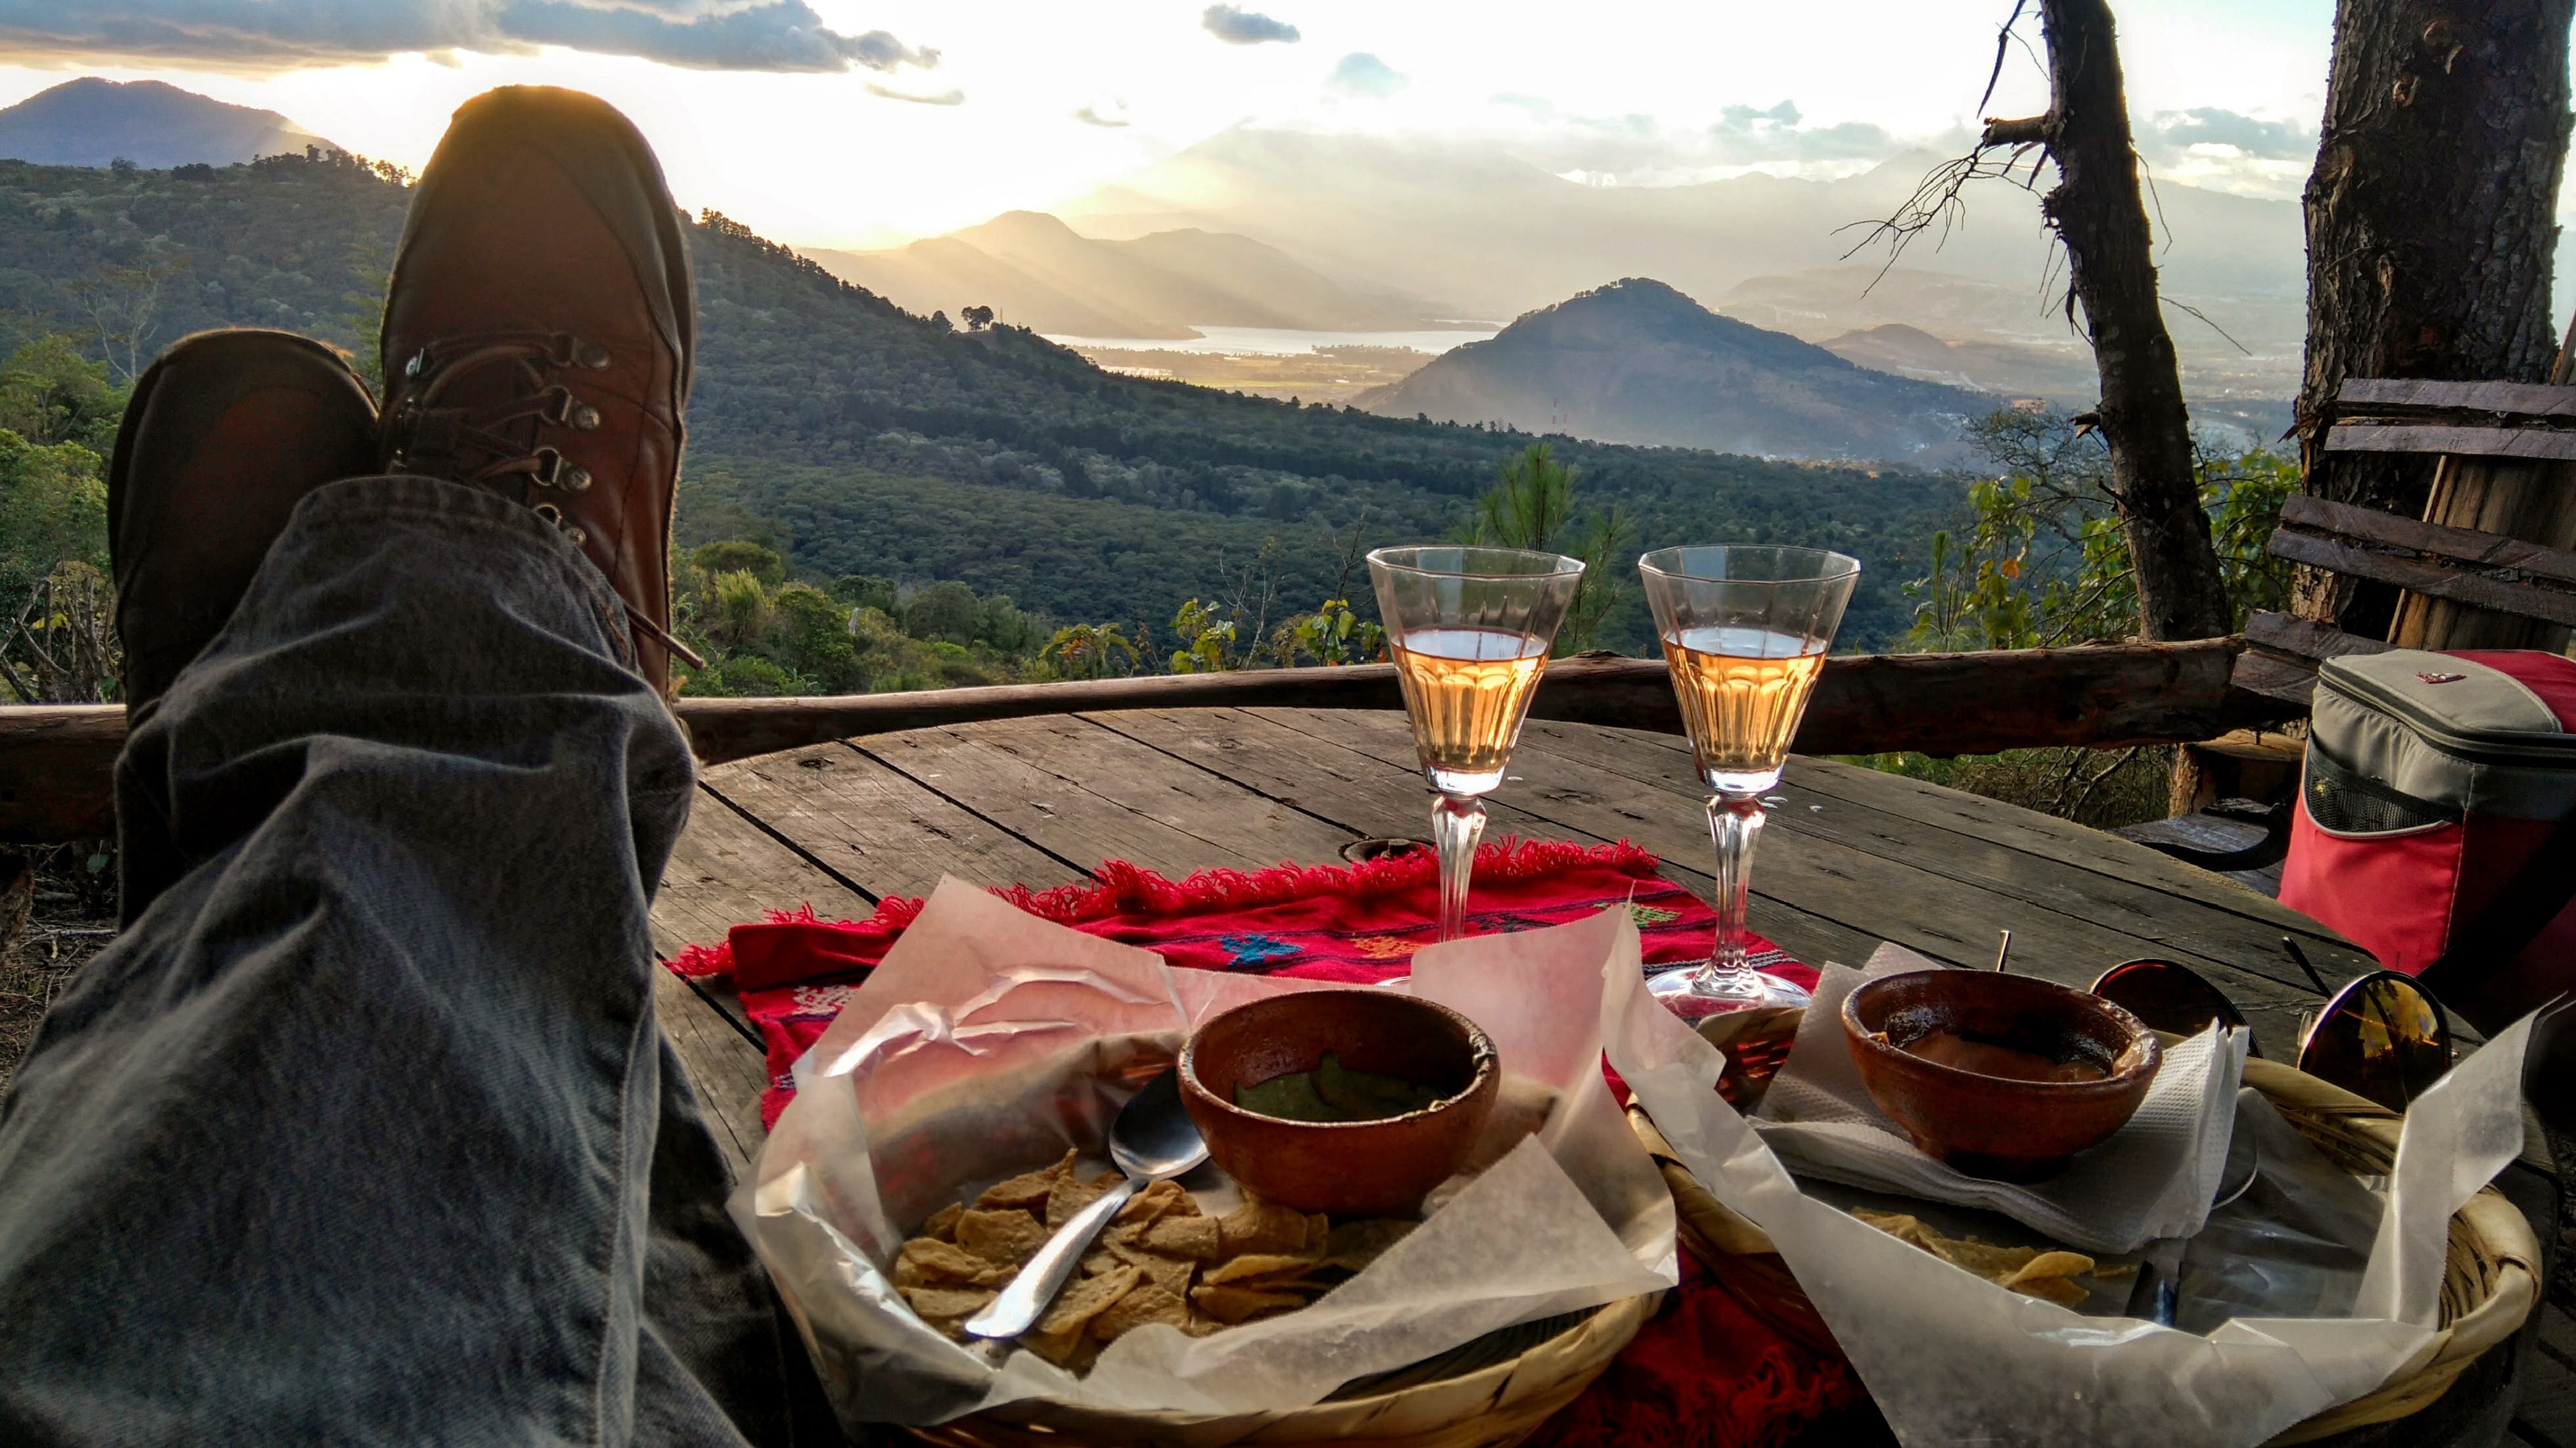 person's feet on table beside dish and champagne glasses during daytime